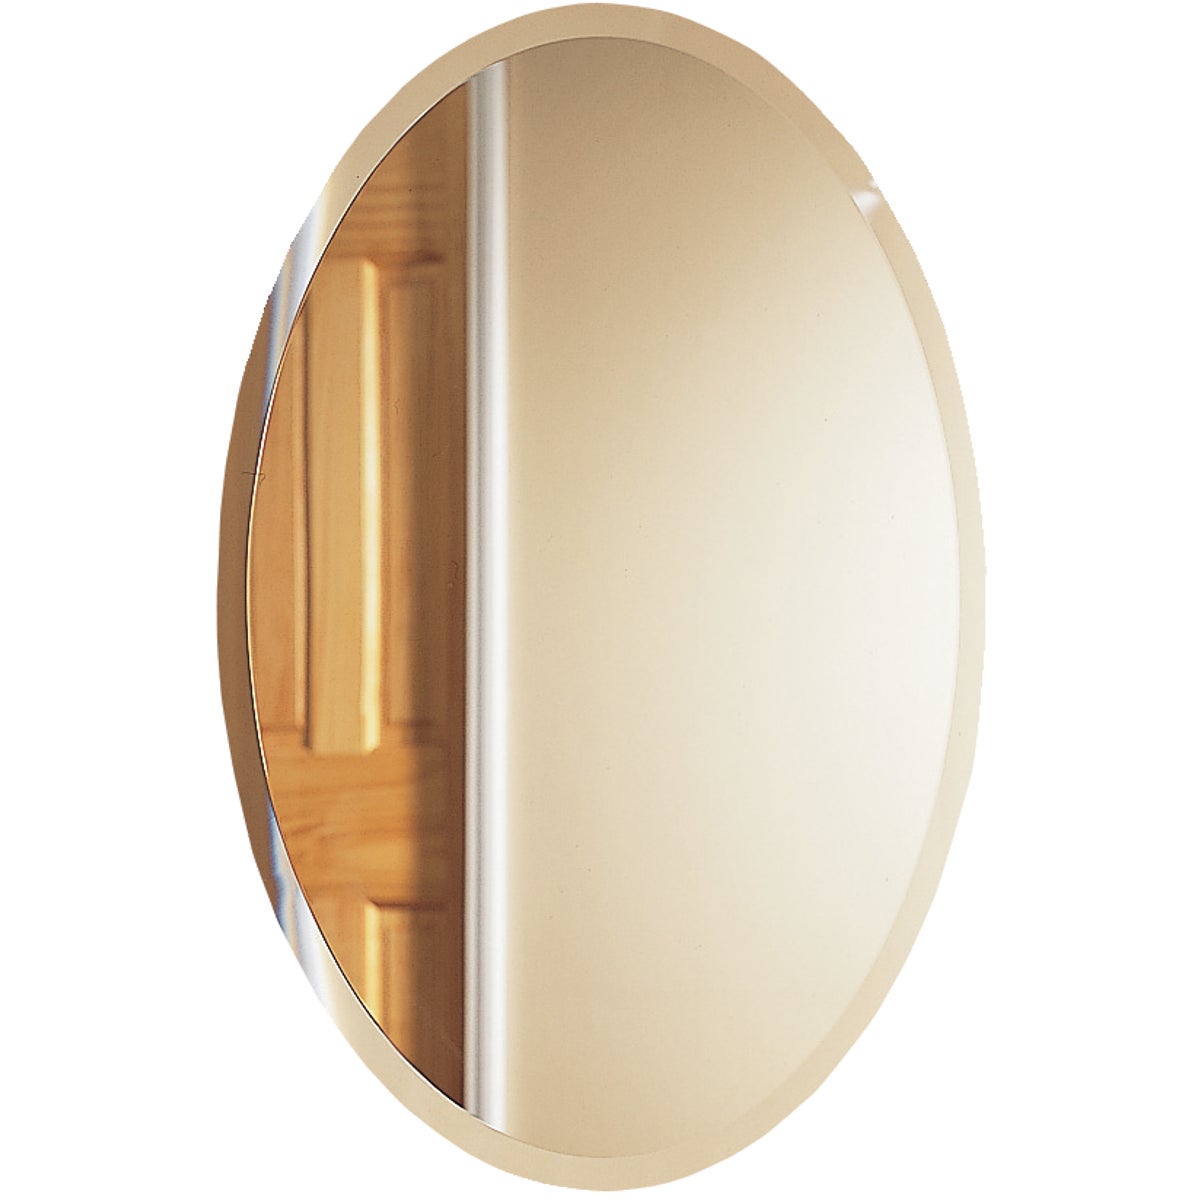 Item 274303, Contemporary frameless oval swing door medicine cabinet is equipped with 